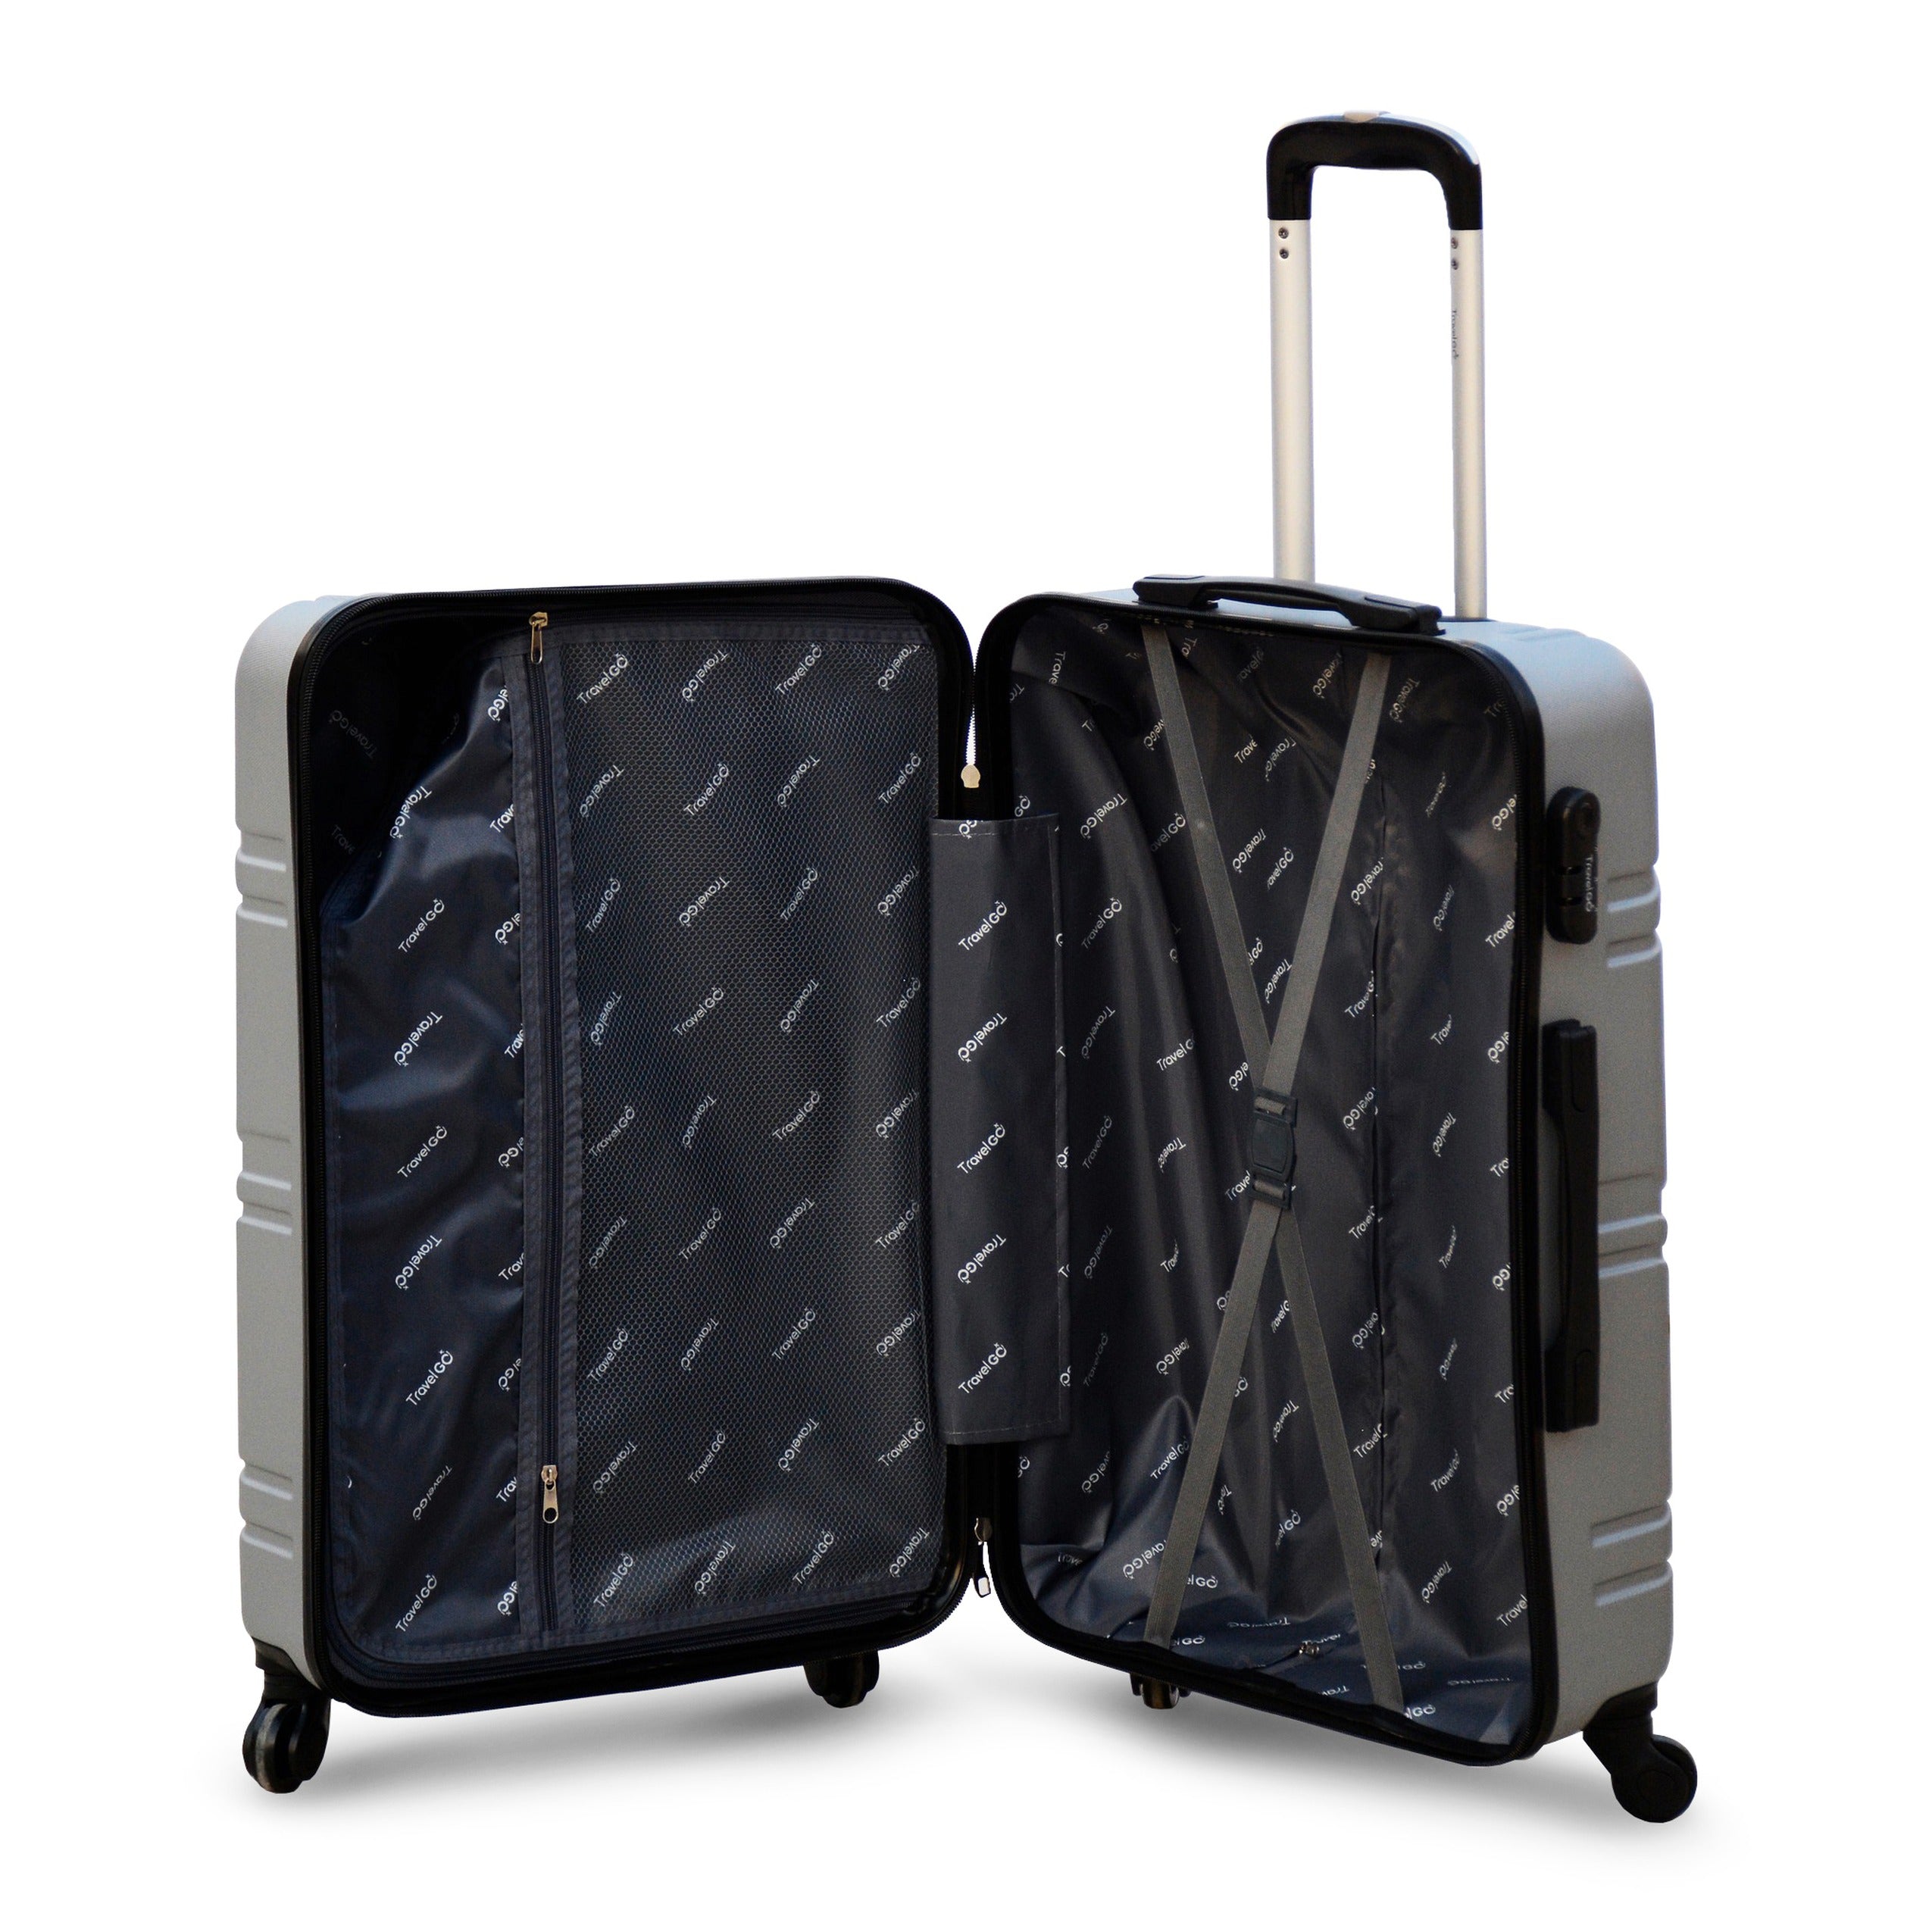 Lightweight ABS Luggage | Hard Case Trolley Bag | 3 Pcs Set 20” 24” 28 Inches | 2 Years Warranty | Yinton 2208 Silver